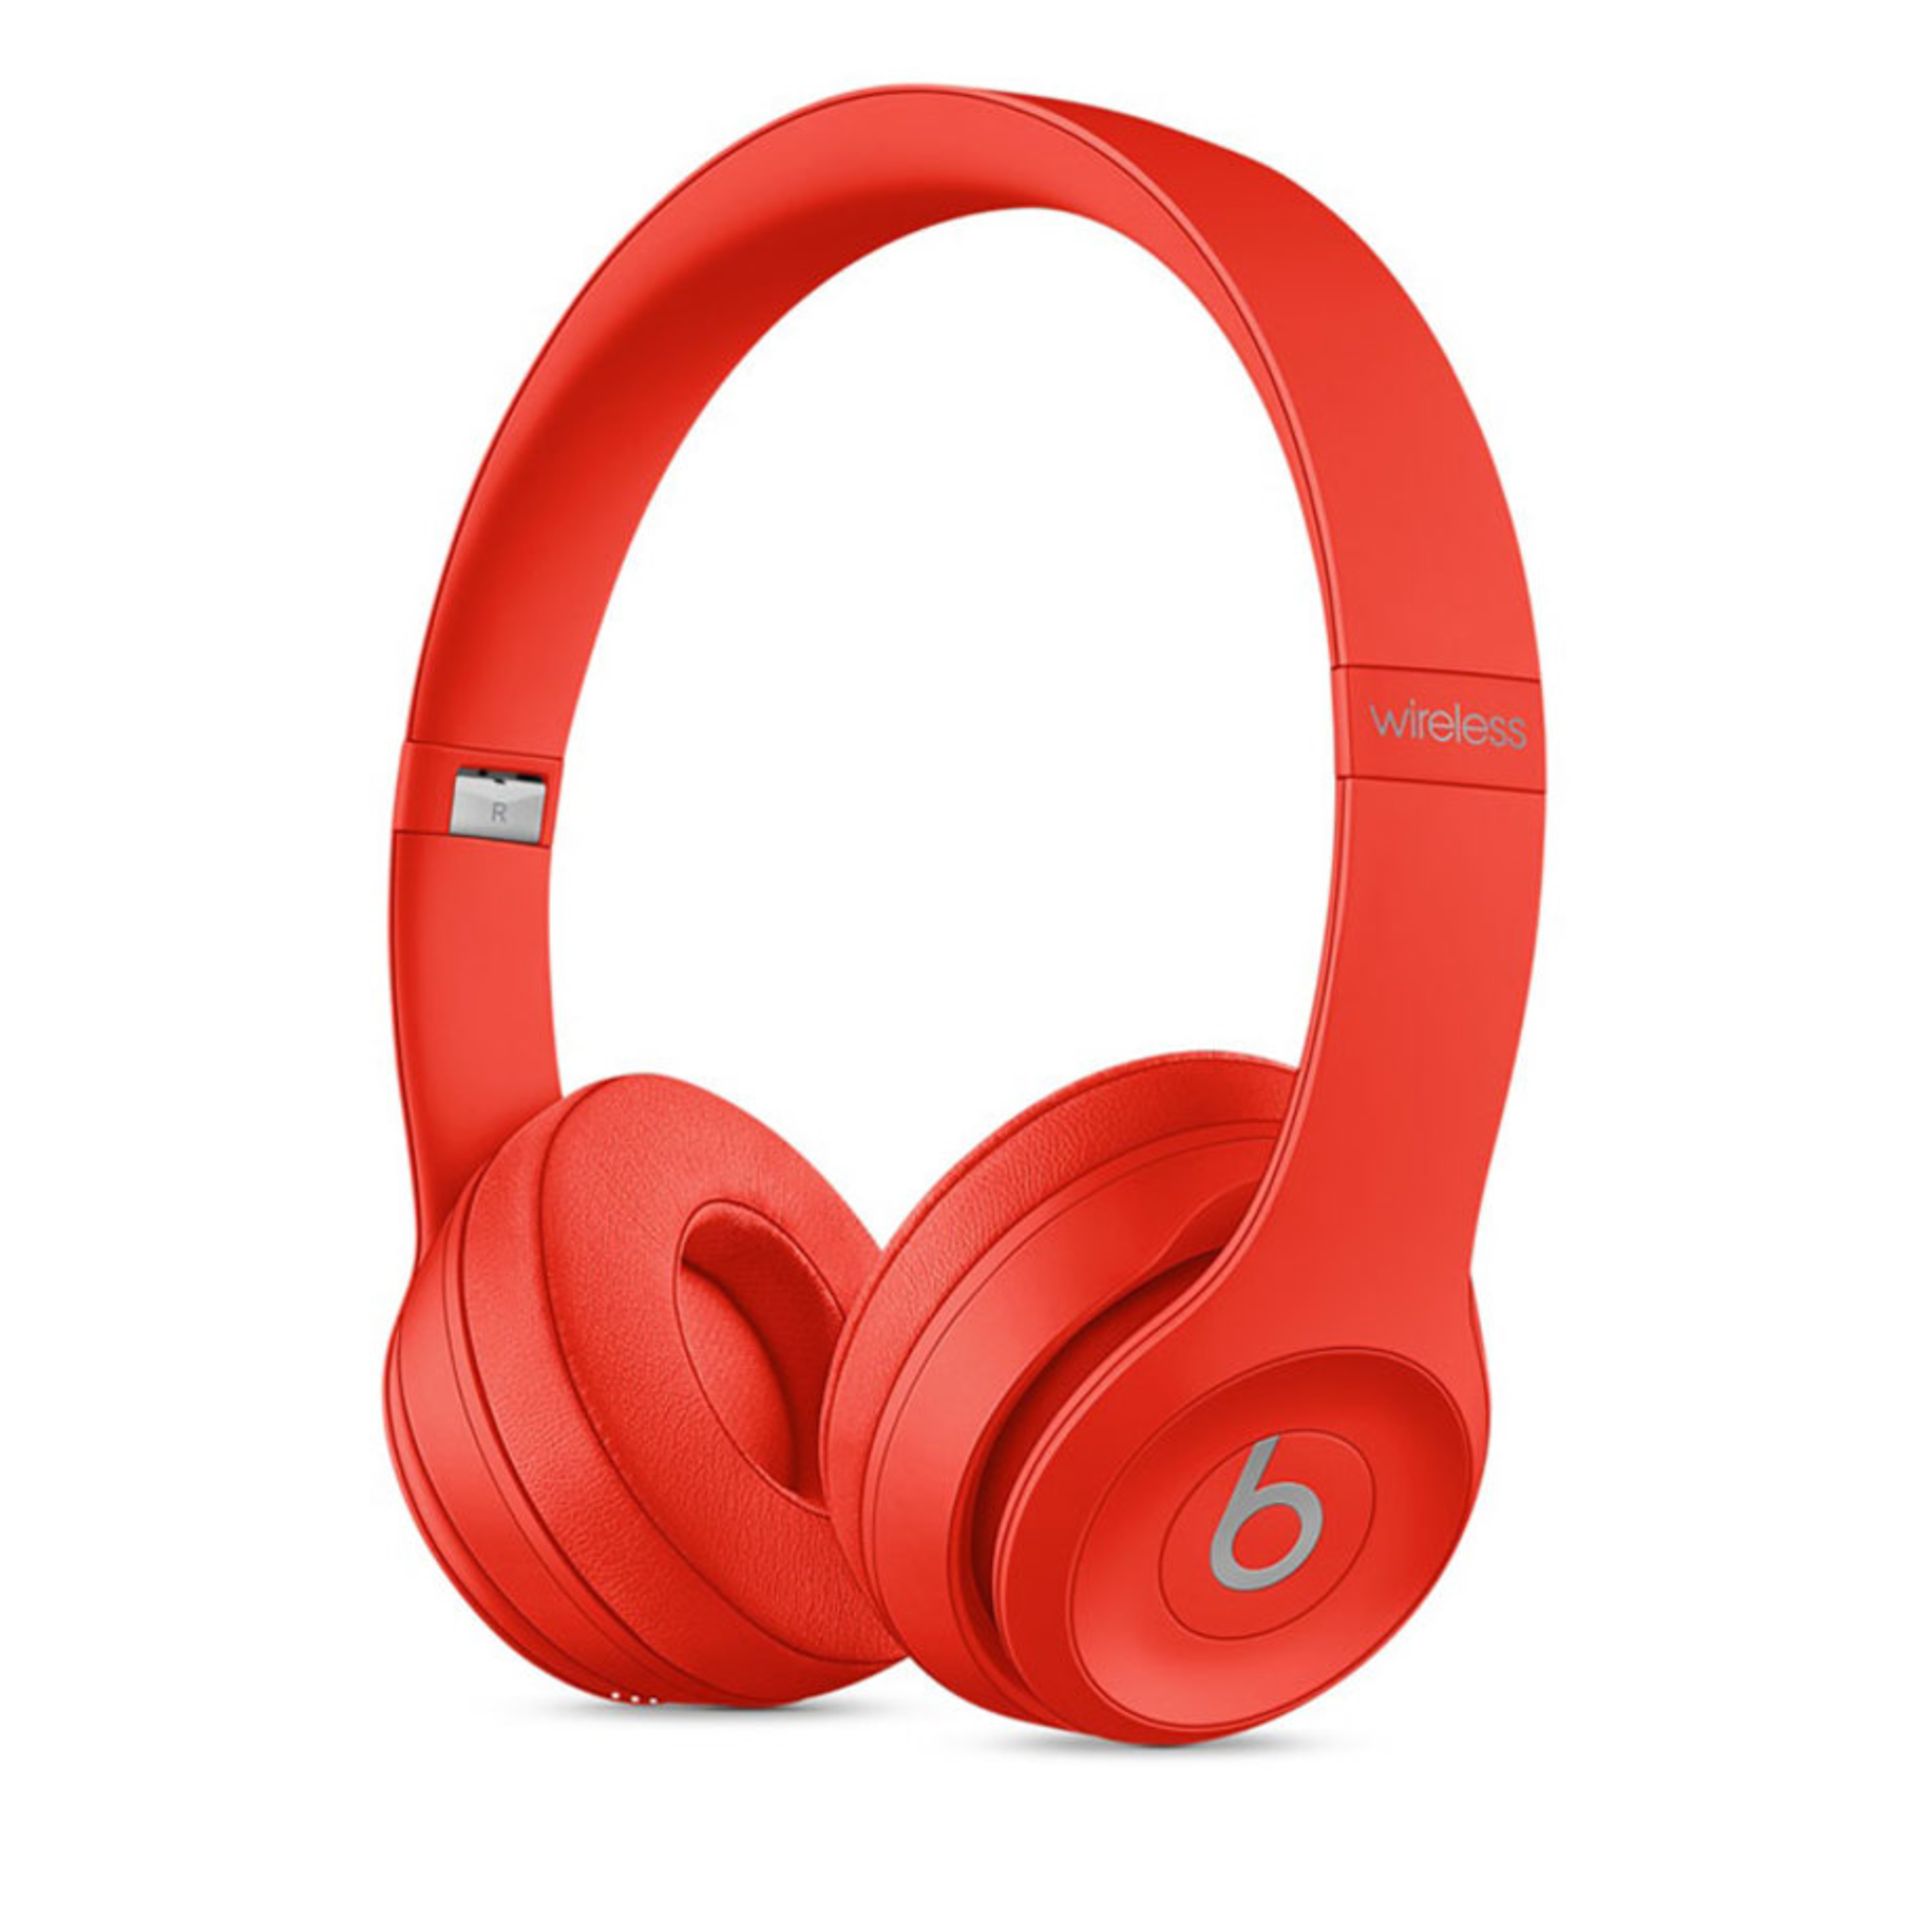 + VAT Brand New Beats Solo 3 Wireless Bluetooth Headphones Citrus Red - Wireless Connect To Your